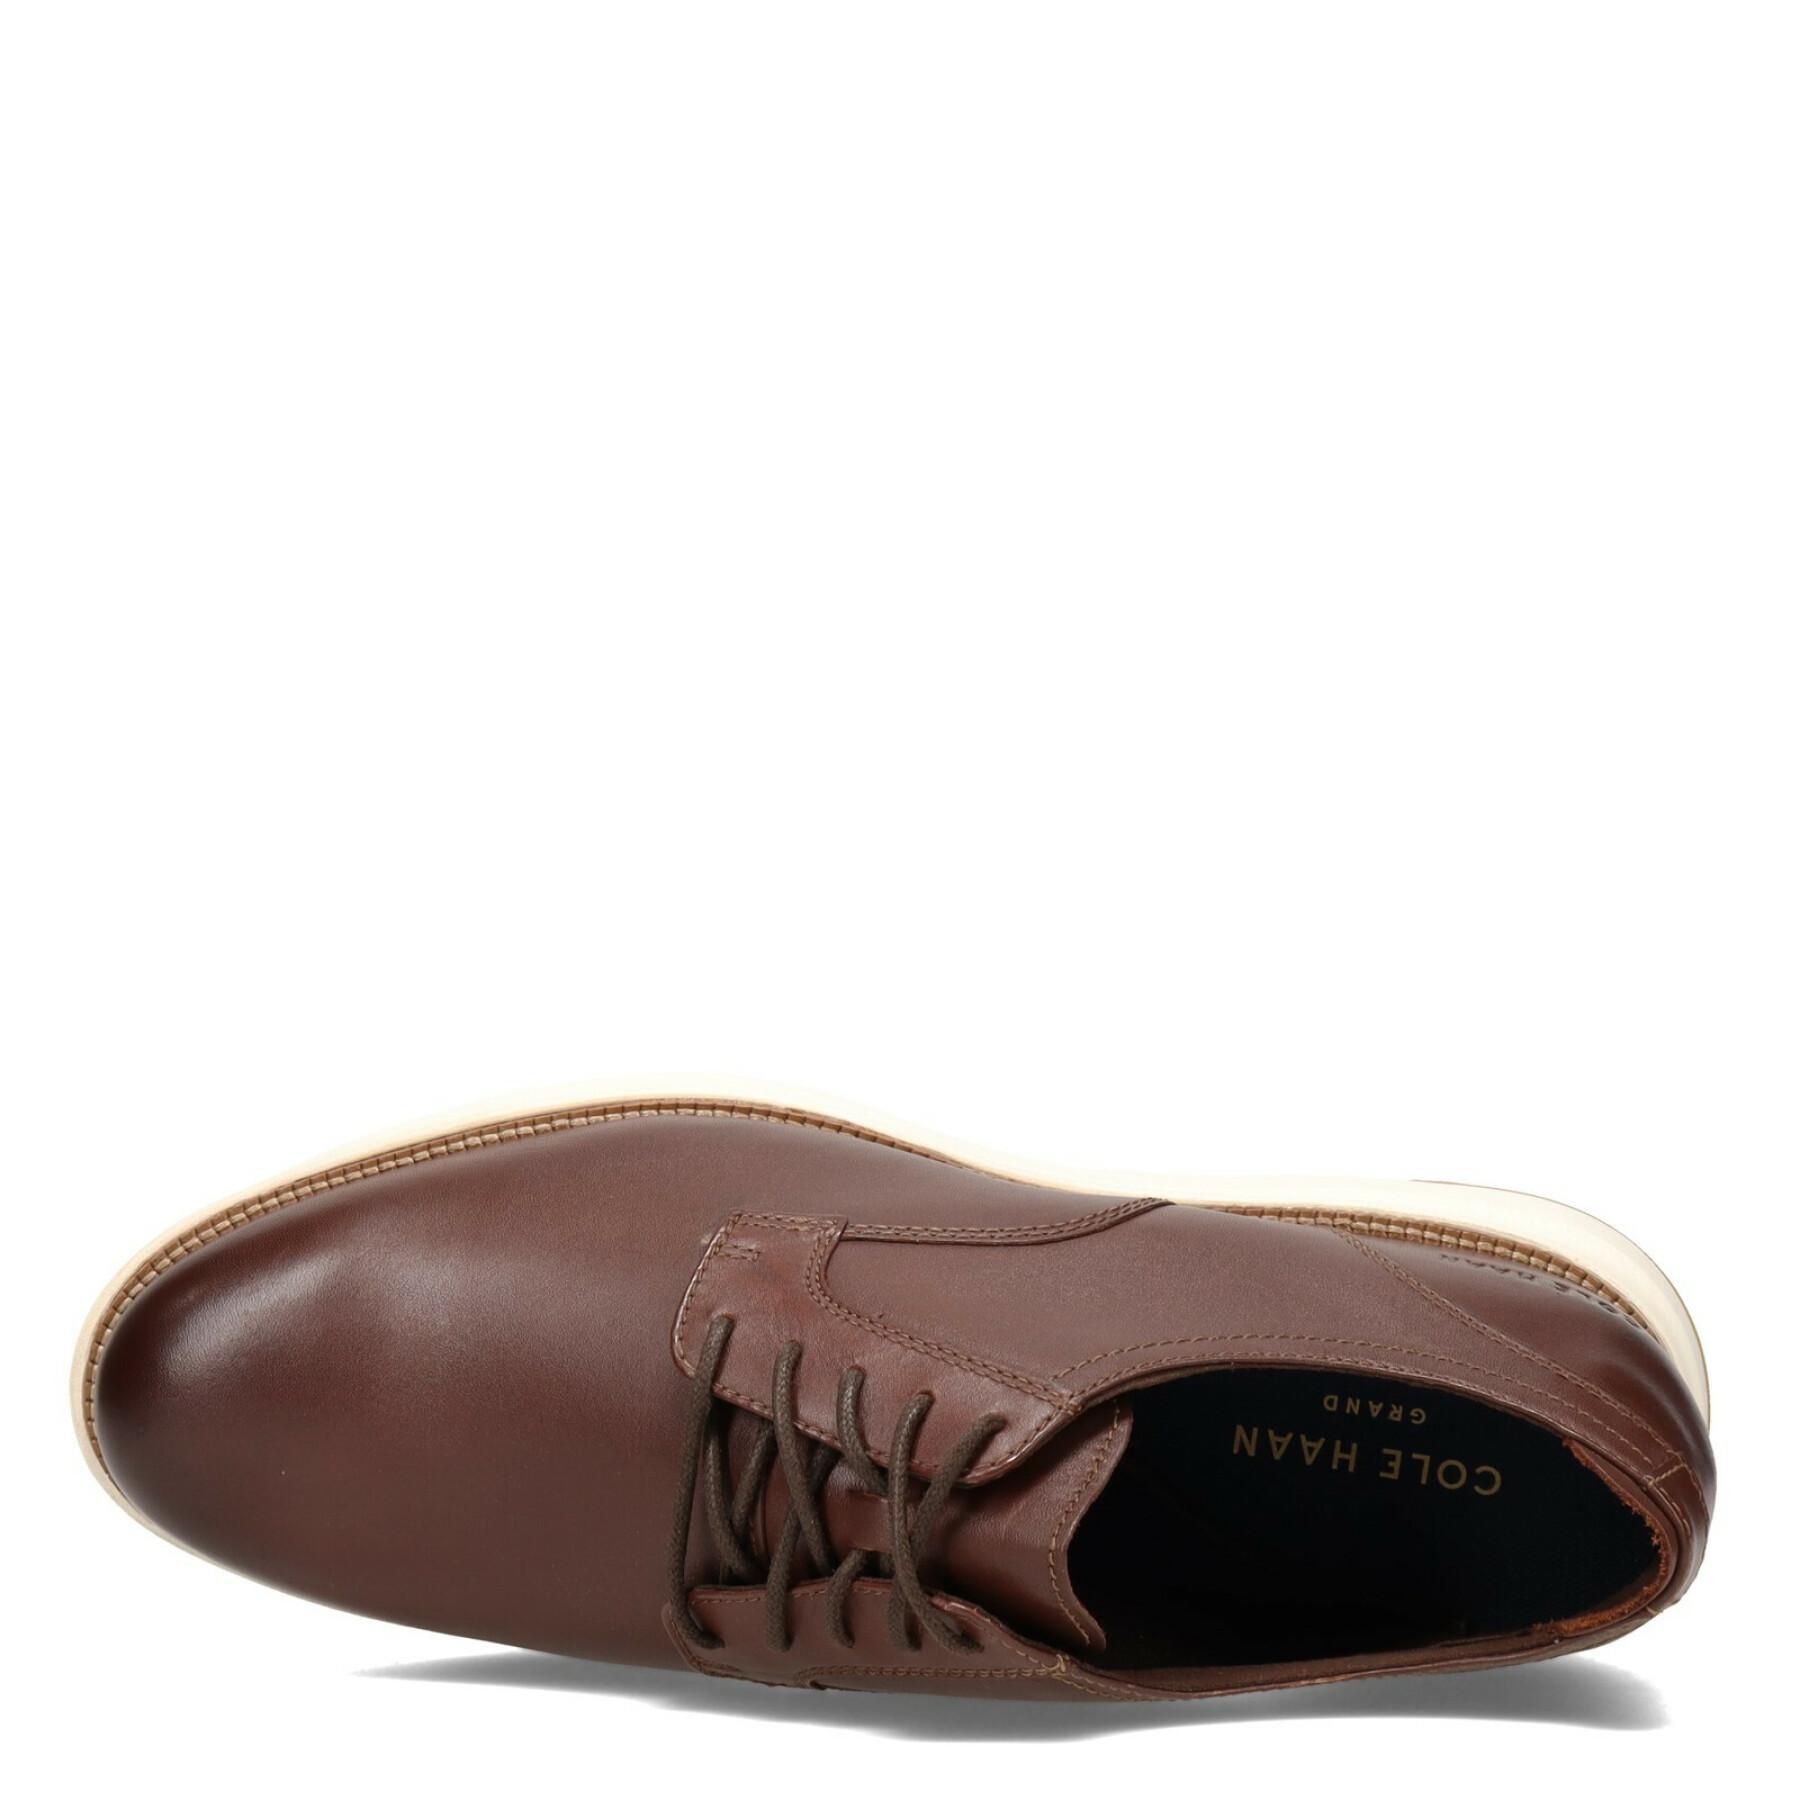 Moccasins Cole Haan Grand Atlantic Oxford